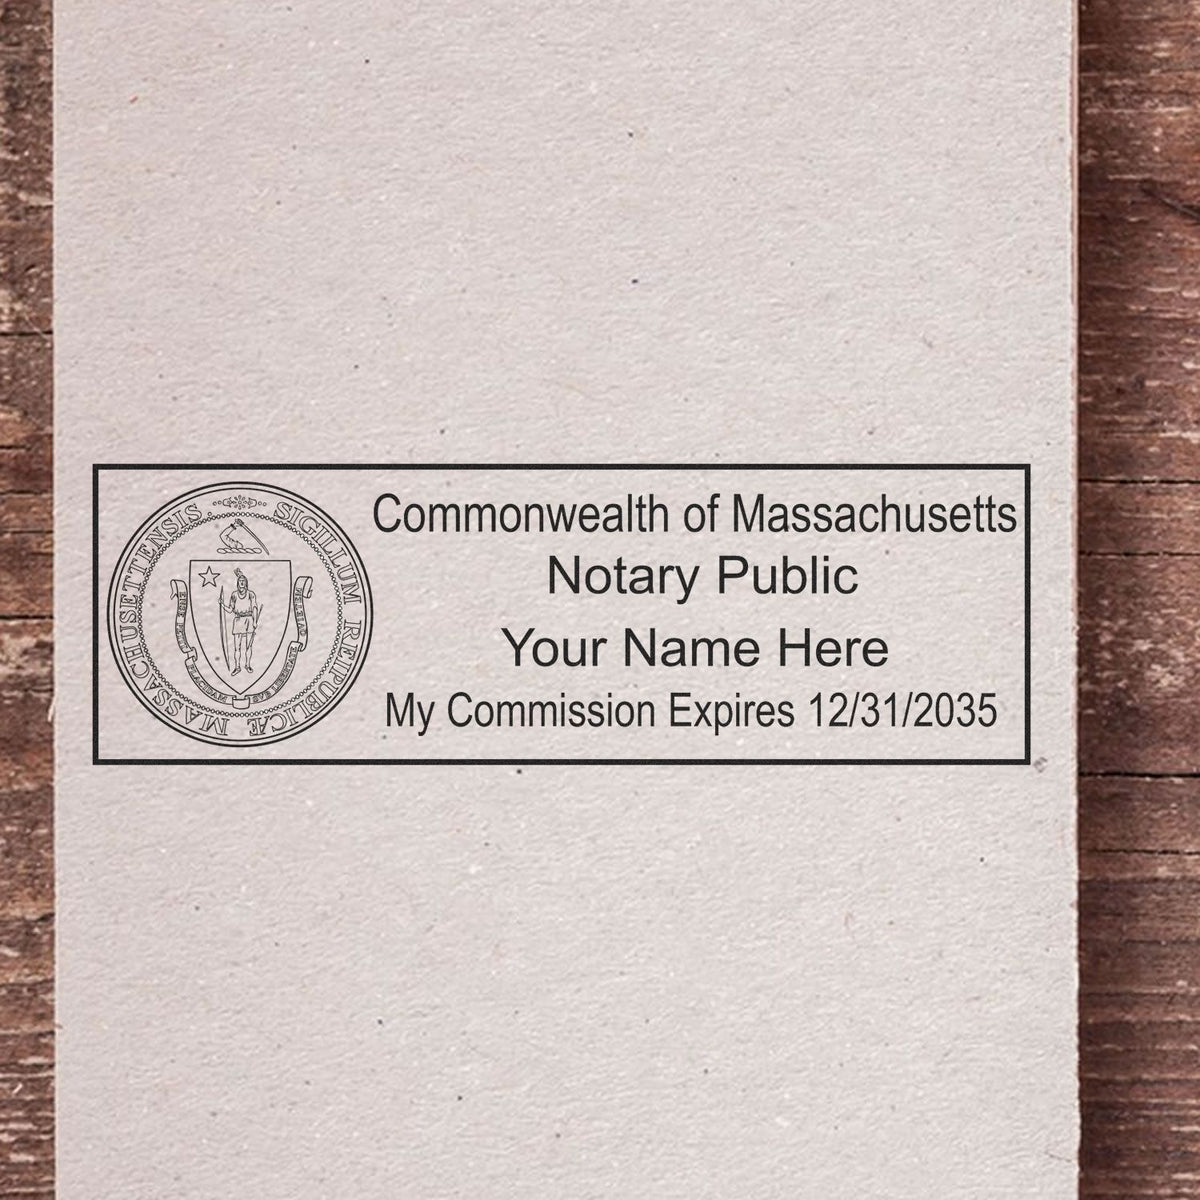 An alternative view of the Super Slim Massachusetts Notary Public Stamp stamped on a sheet of paper showing the image in use